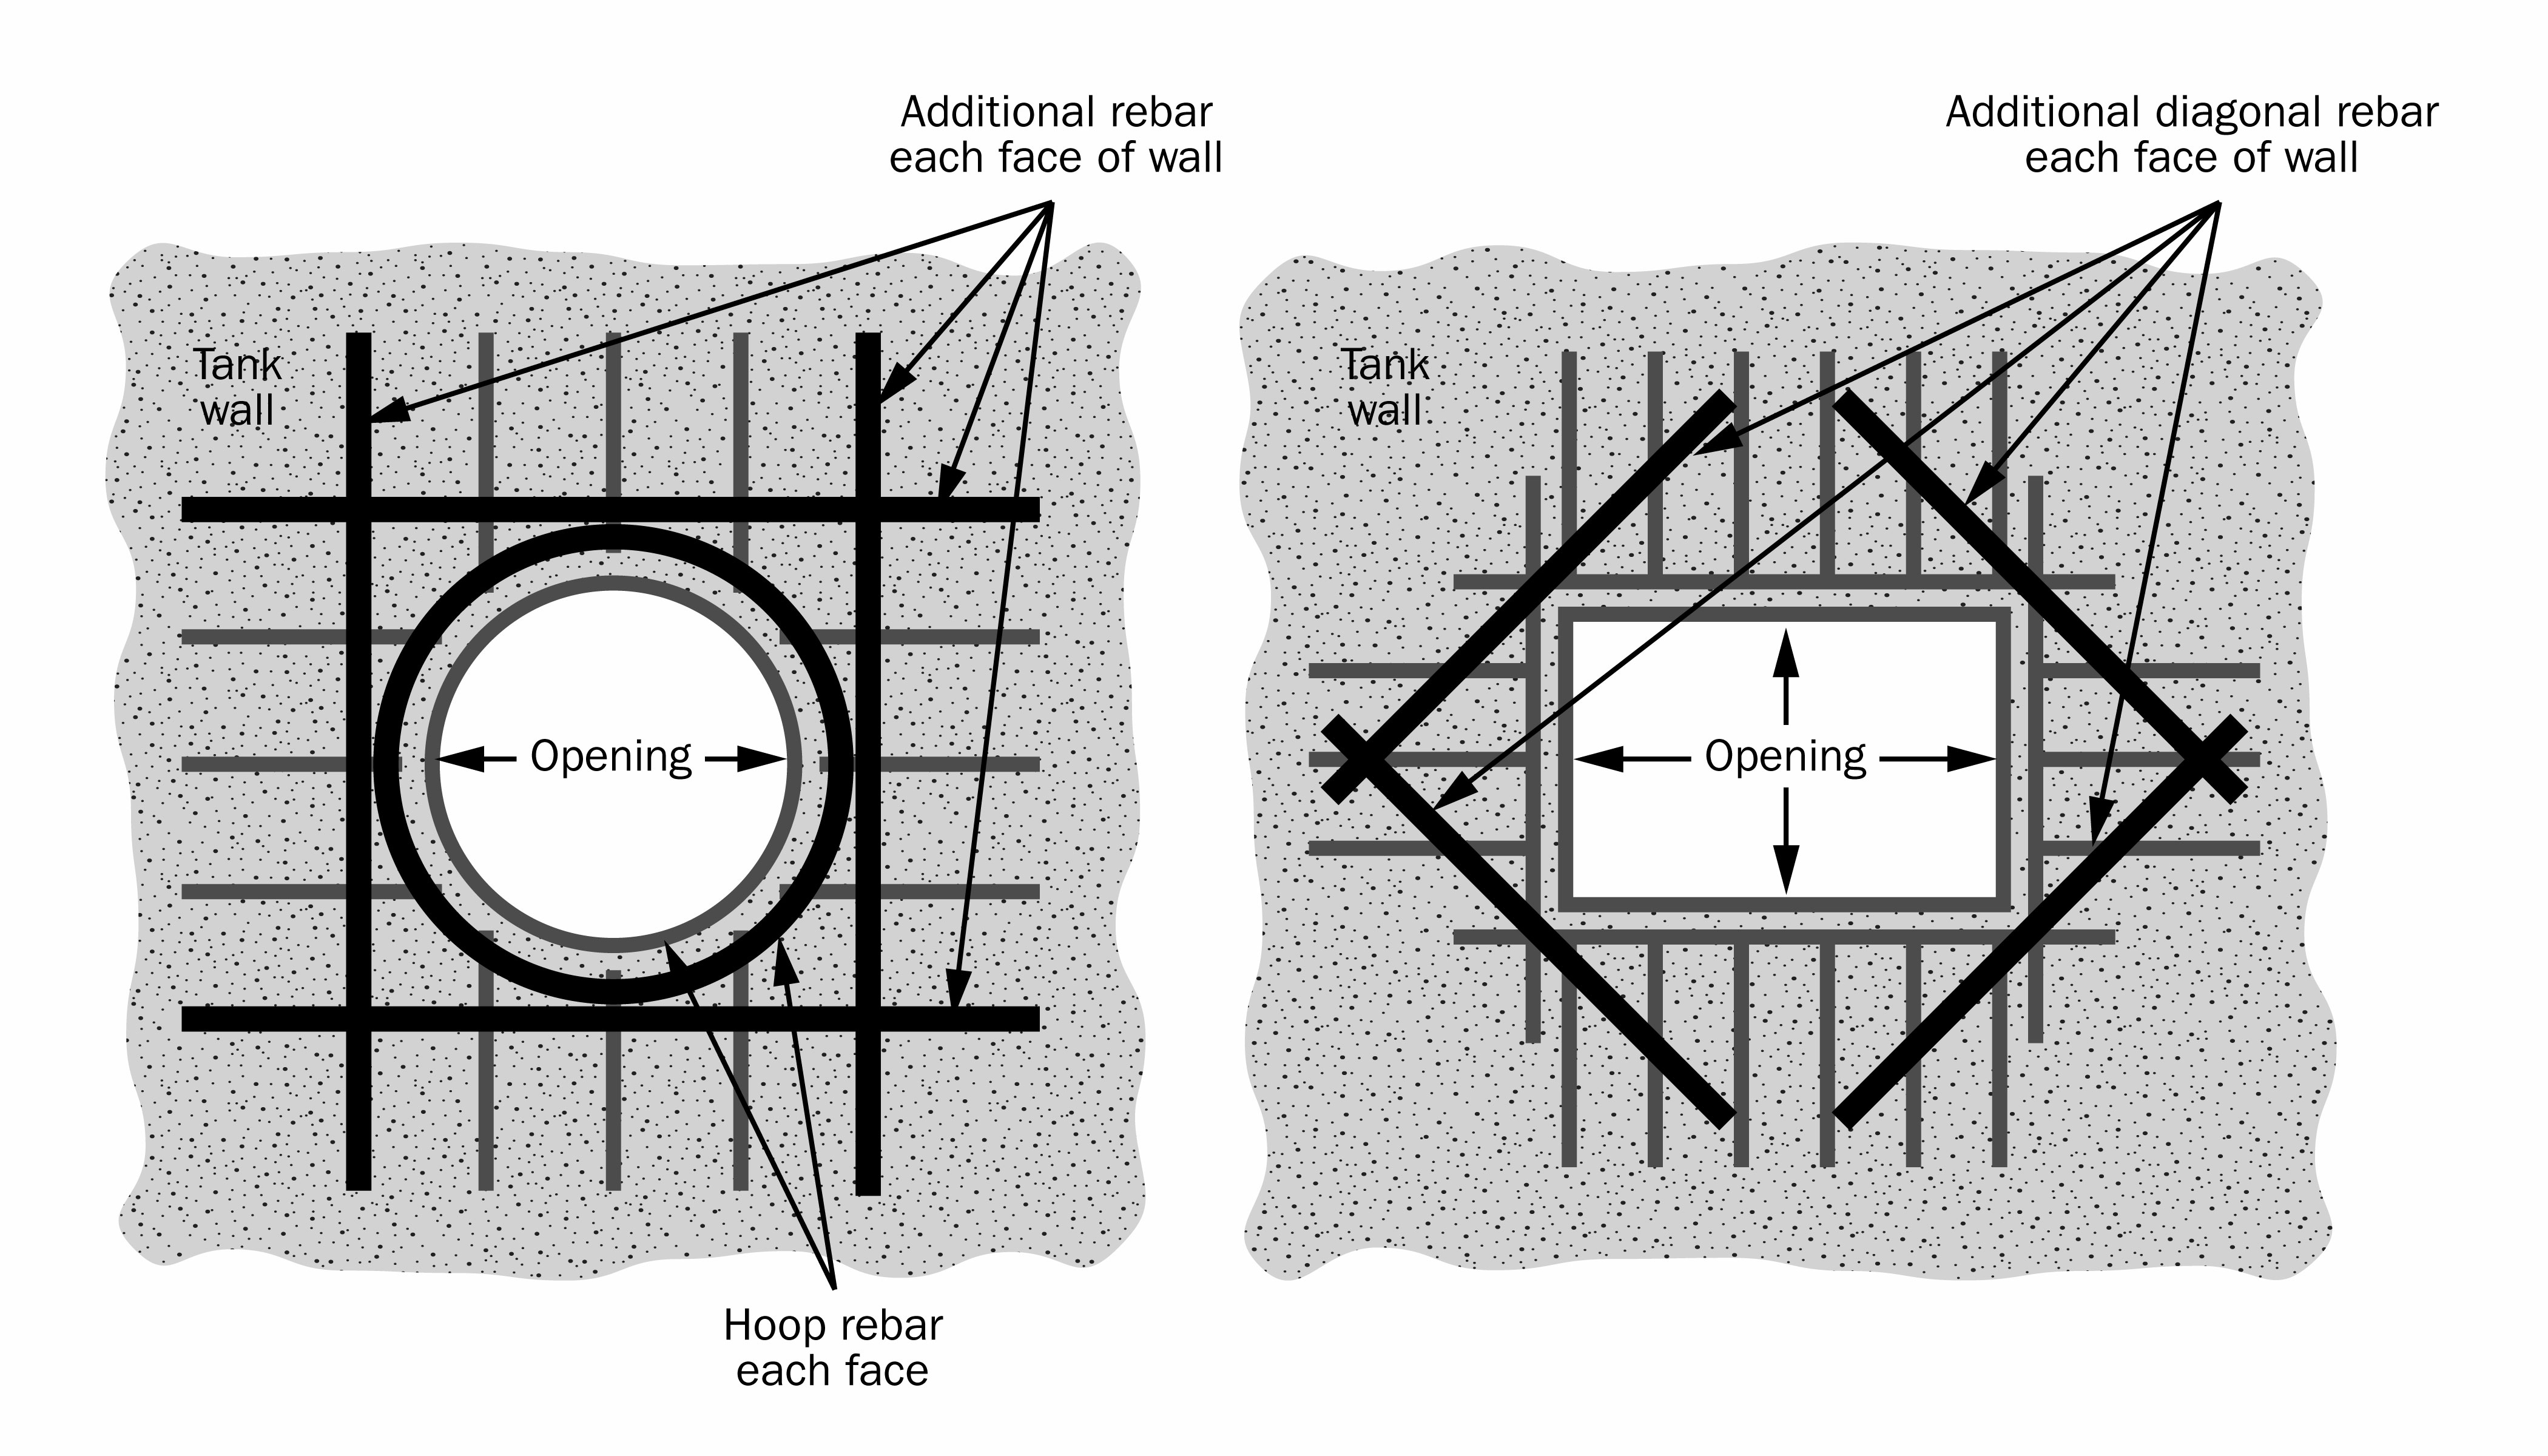 A drawing showing the concept of forming openings in walls of reinforced concrete manure tanks to accept transfer piping.